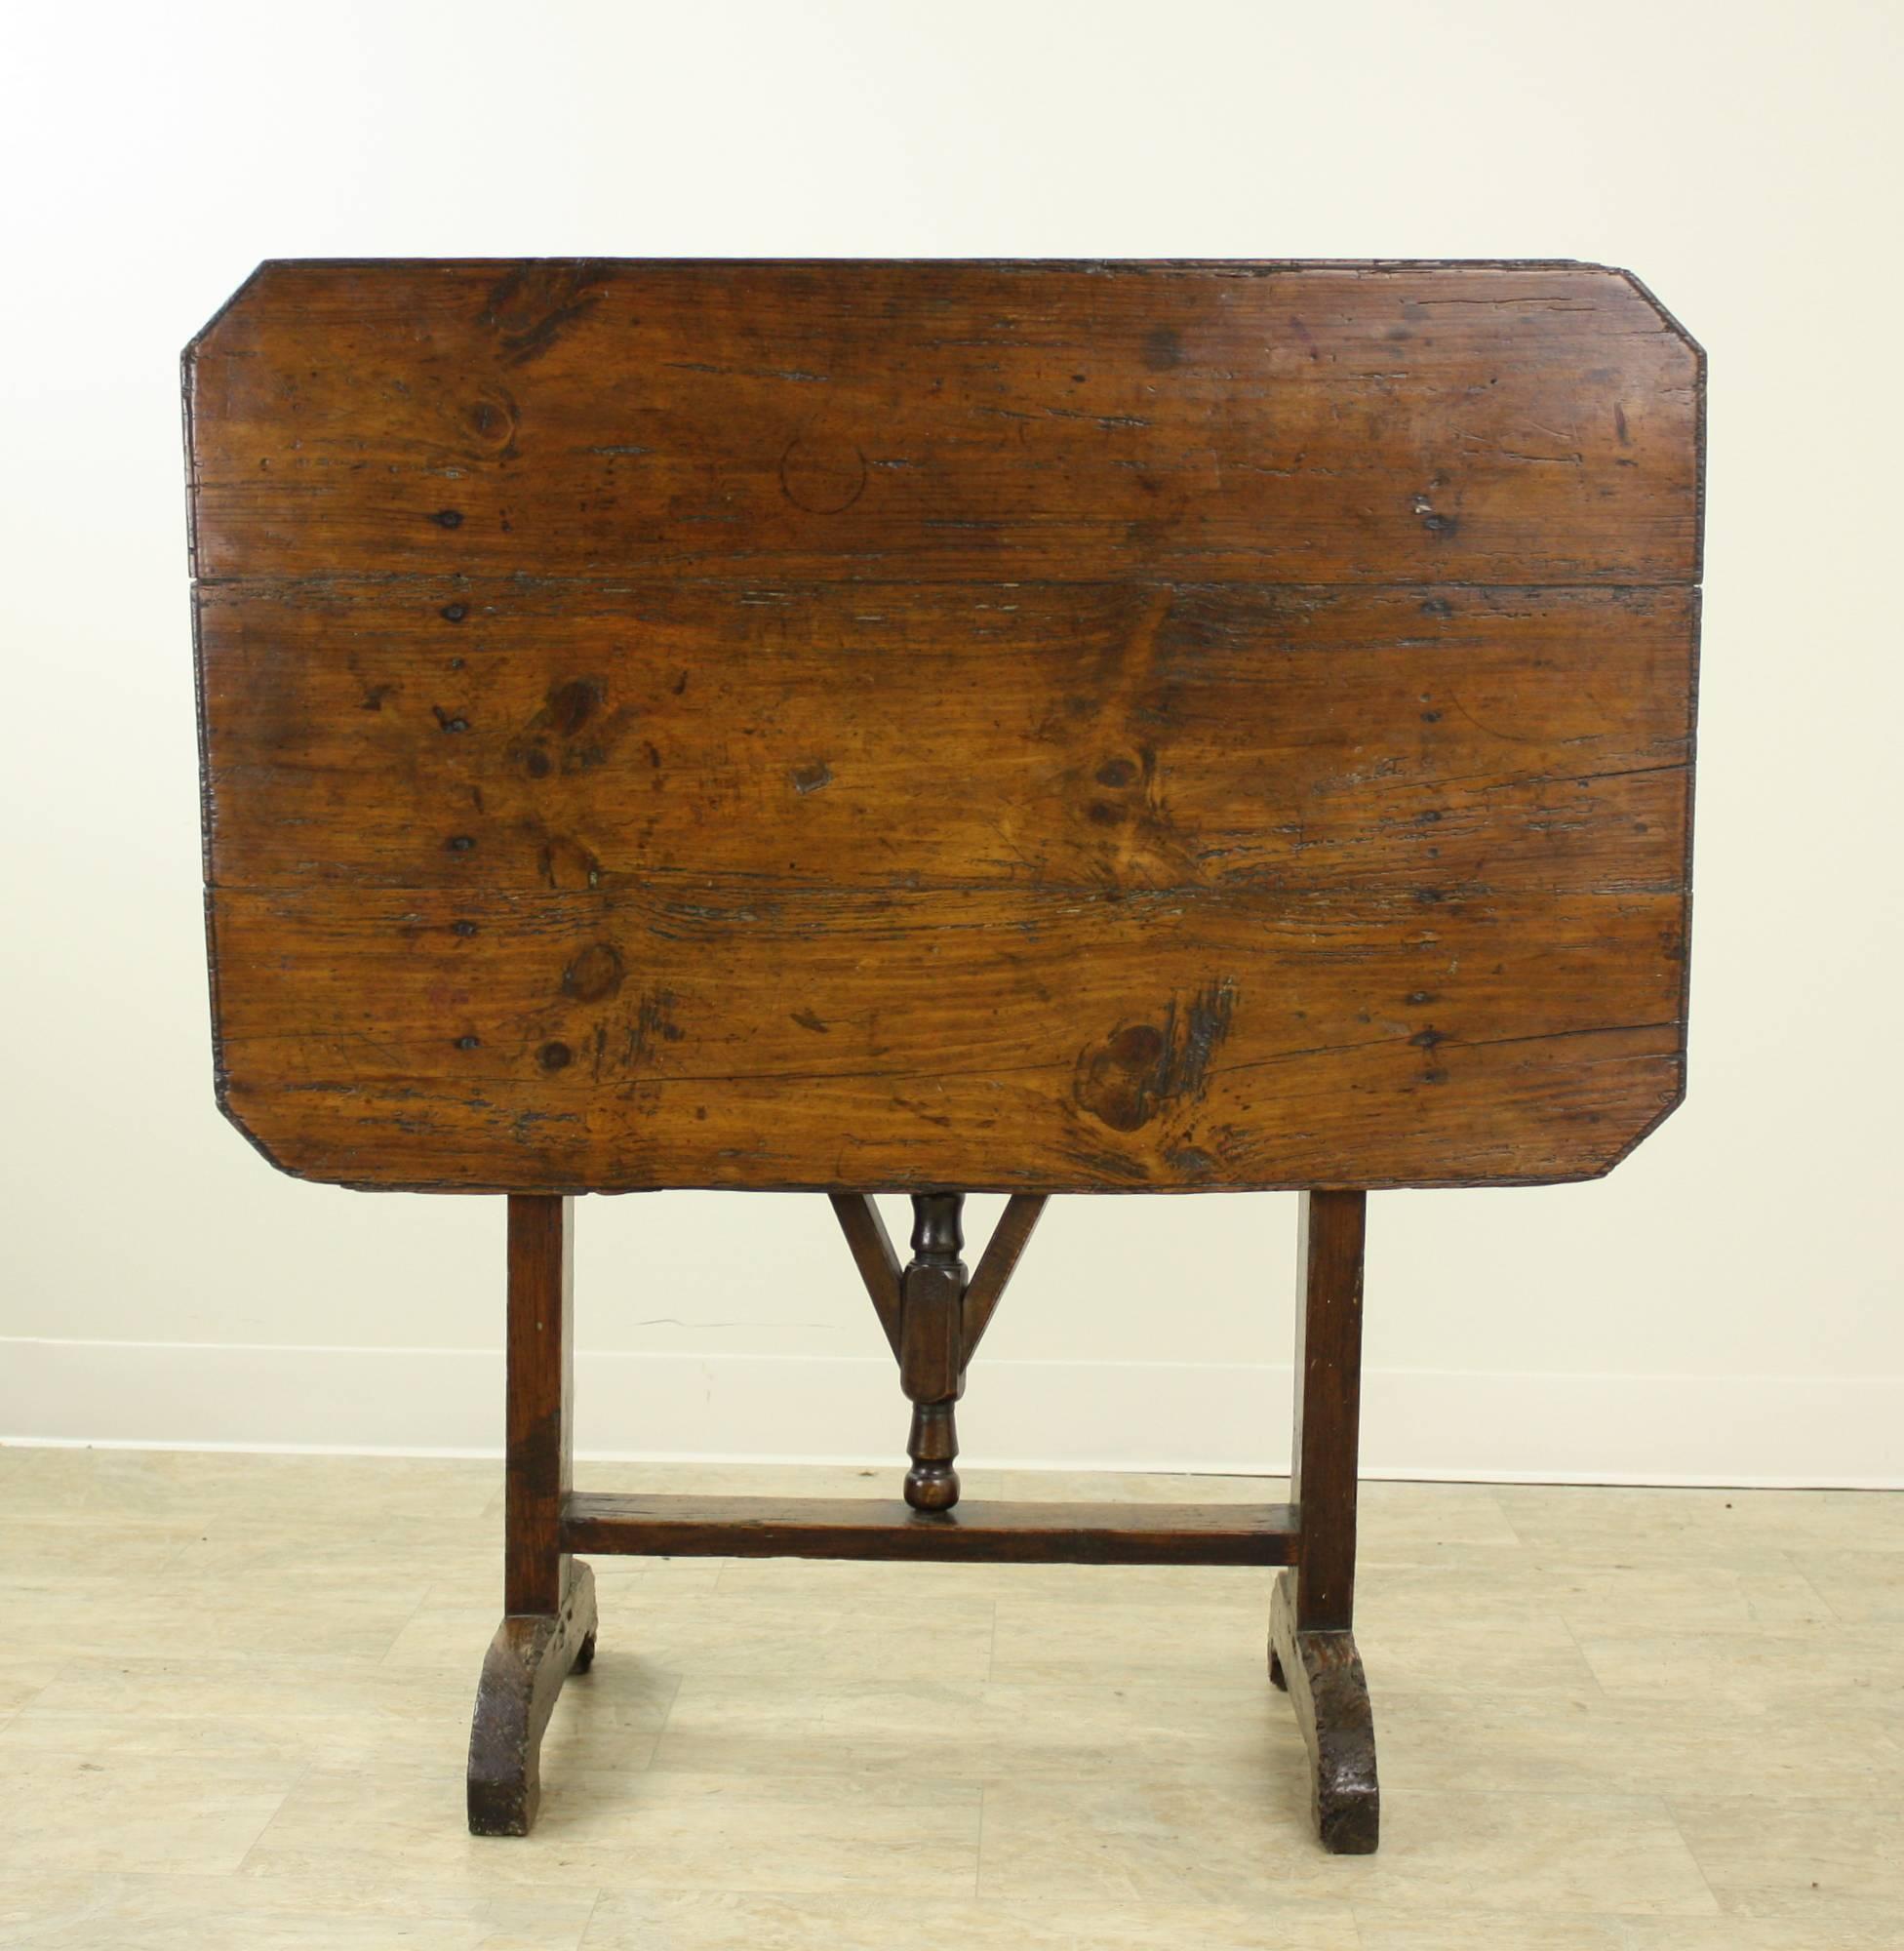 The distressed graining on this pine vendange wine tasting table is quite wonderful, and unusual to find with a rectangular top. The top has a lovely patina and a good carved edging. The swivel table base is easy to use, sturdy, and well turned. The